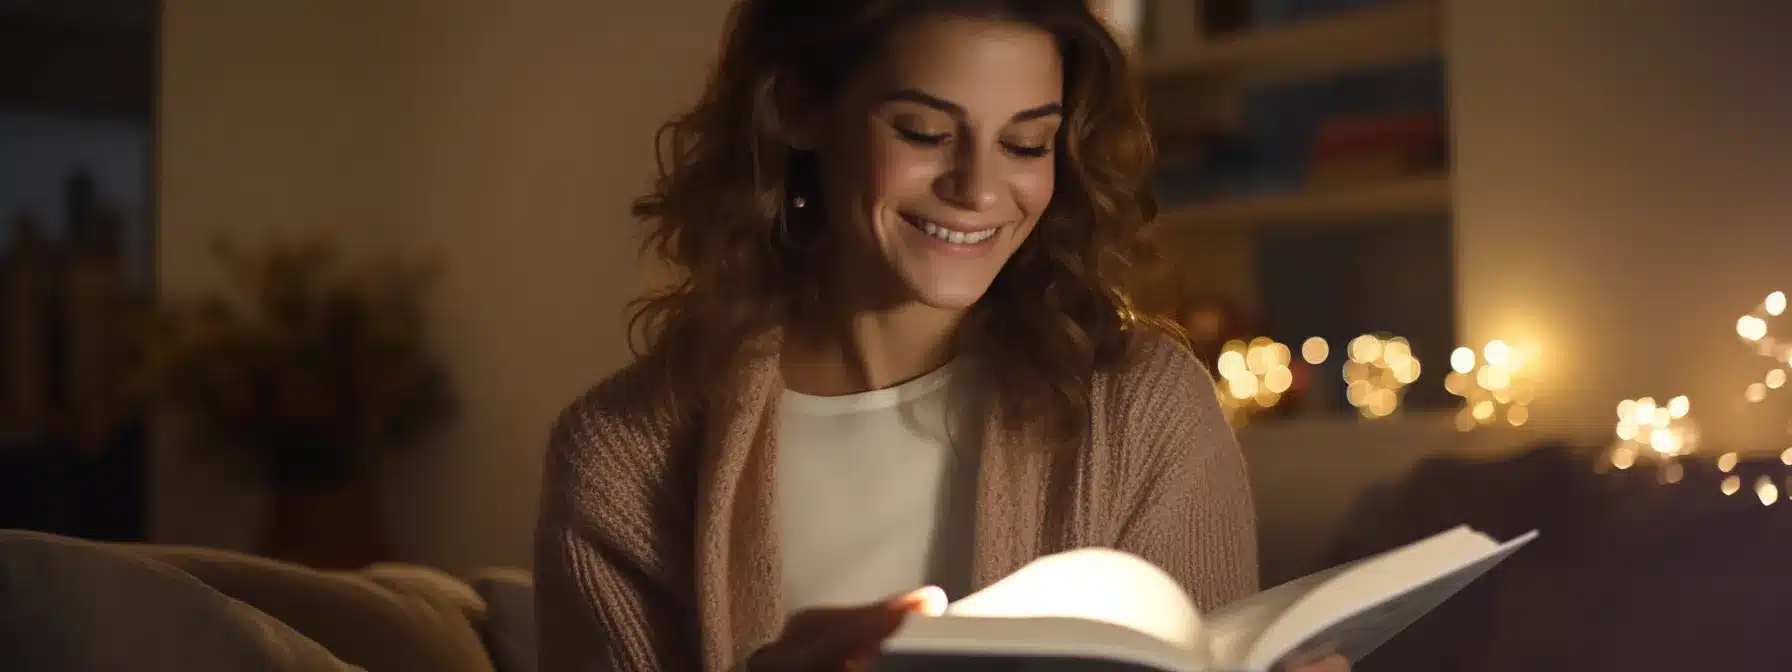 A Person Reading A Captivating Novel With A Surprised And Delighted Expression On Their Face.